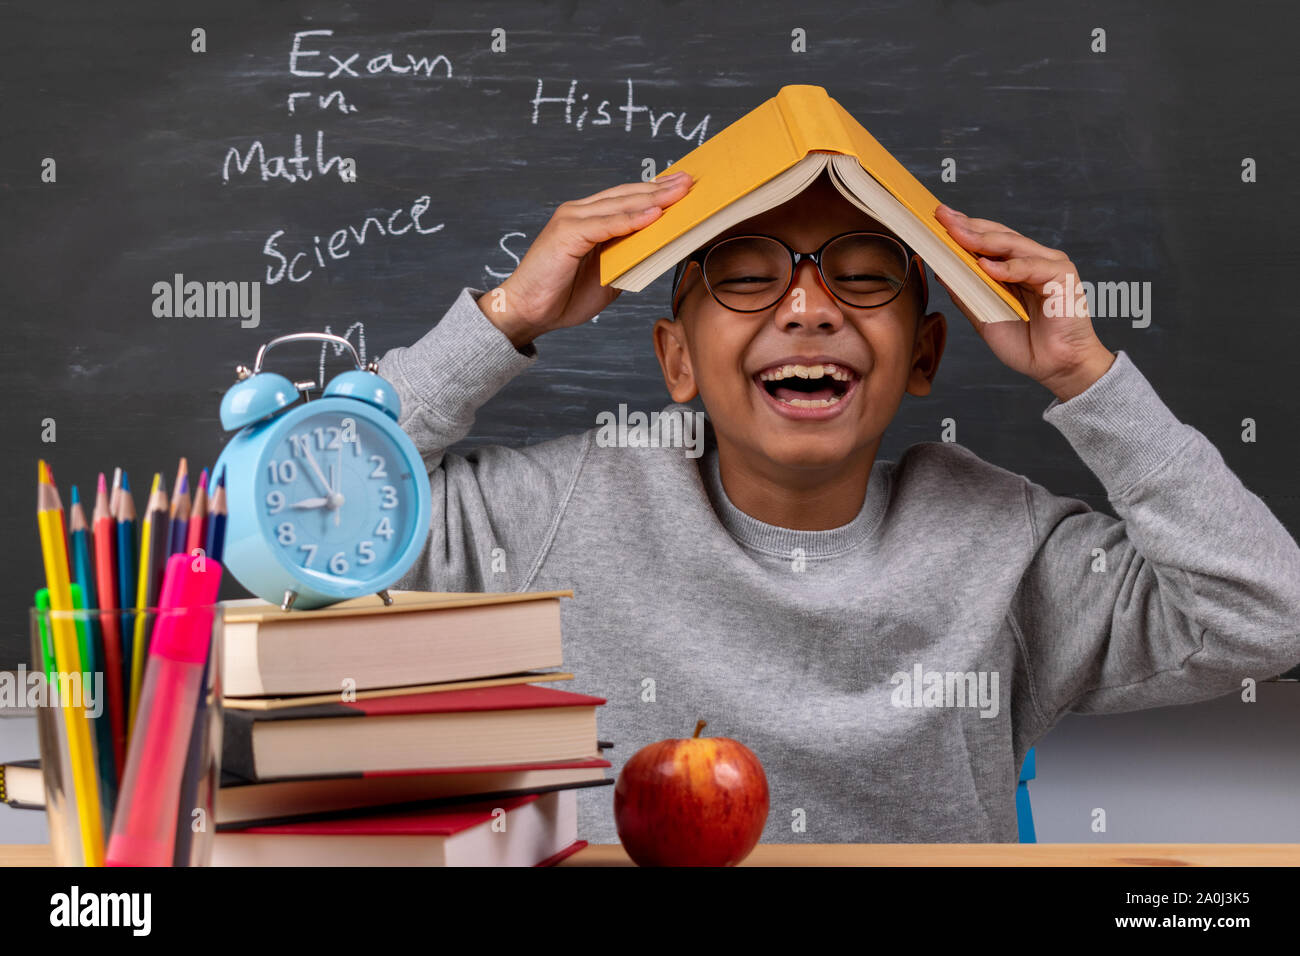 Cheerful thoughtful school boy, back to school concept. Stationery supplies on classroom desk with chalkboard background. Stock Photo